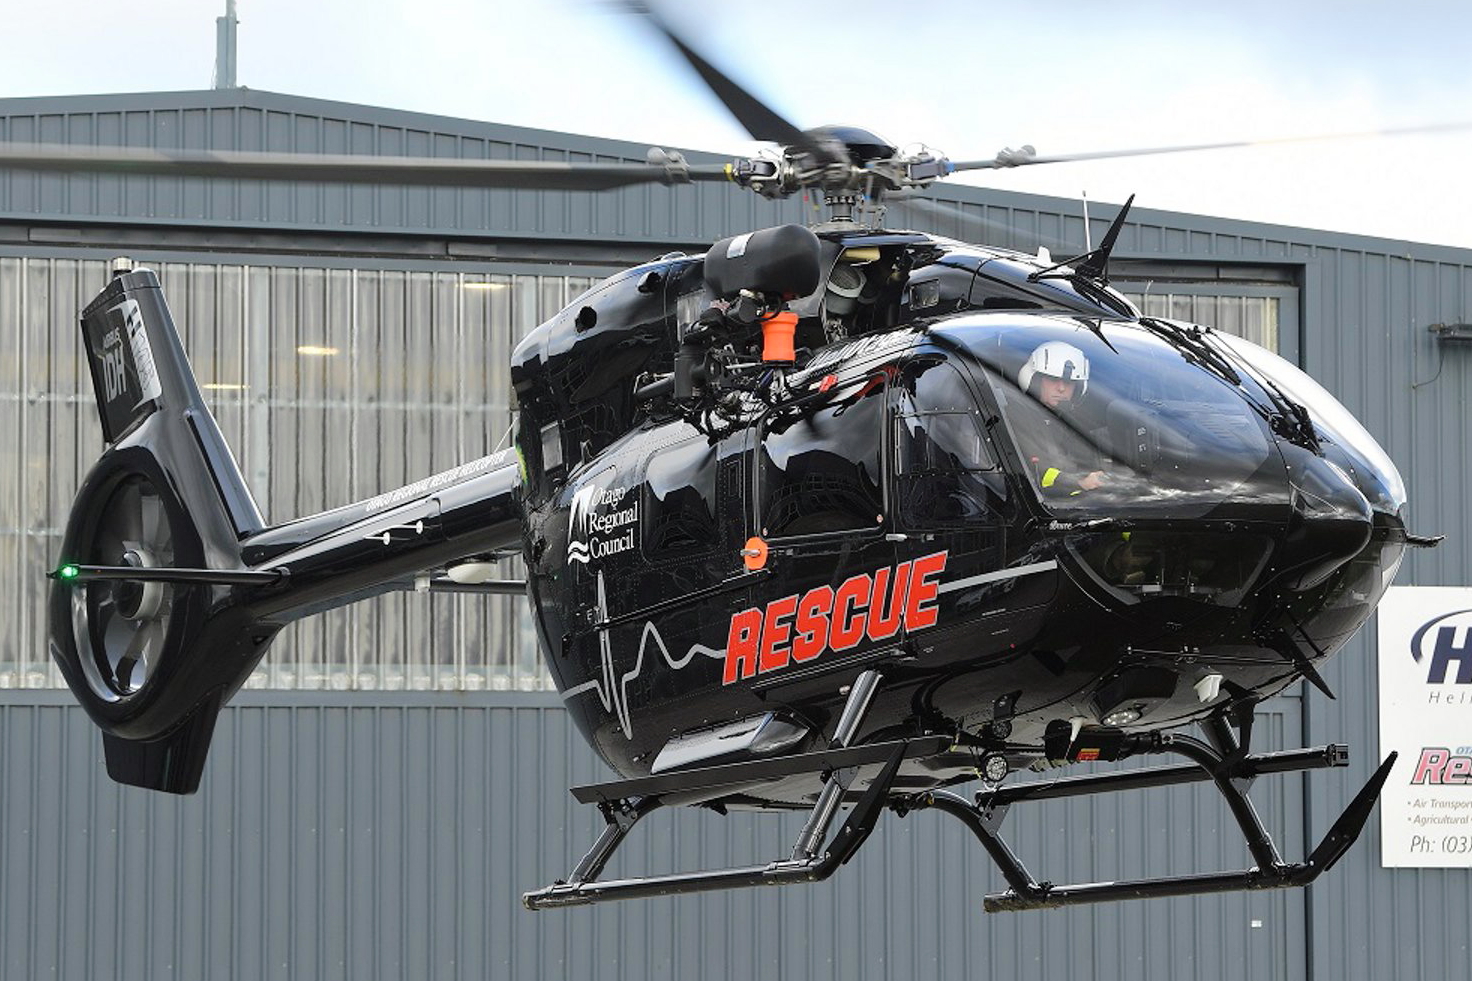 The New Zealand Helicopter Emergency Medical Services has taken delivery of two Airbus H145 helicopters, the first two H145s in an EMS configuration in the New Zealand market. Click to enlarge.